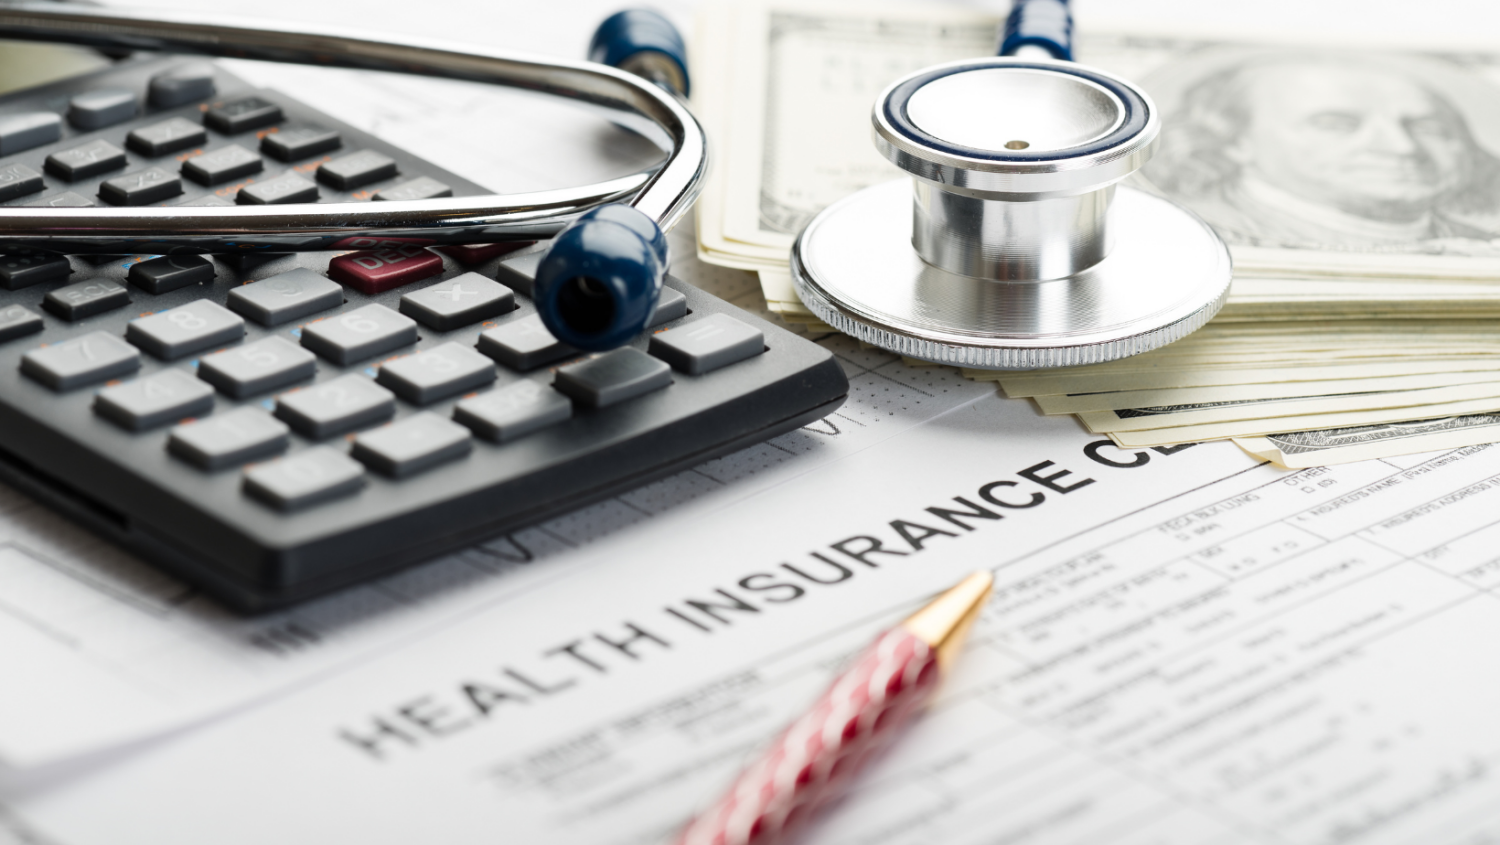 health insurance forms with calculator